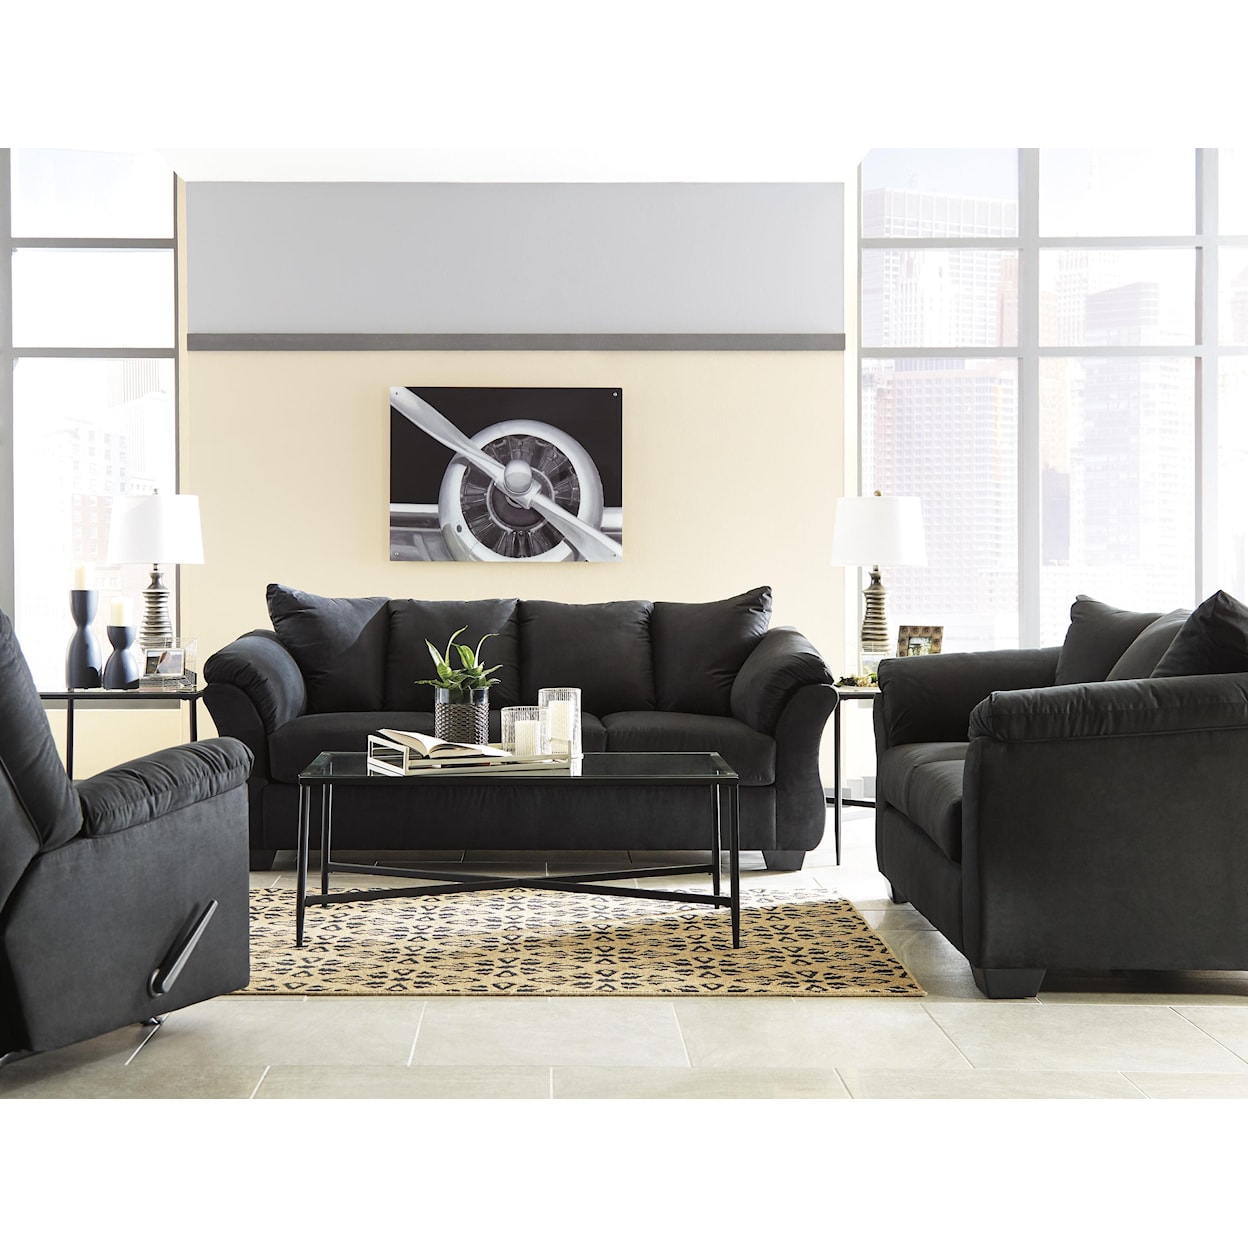 Signature Design by Ashley Darcy Sofa, Loveseat and Recliner Set